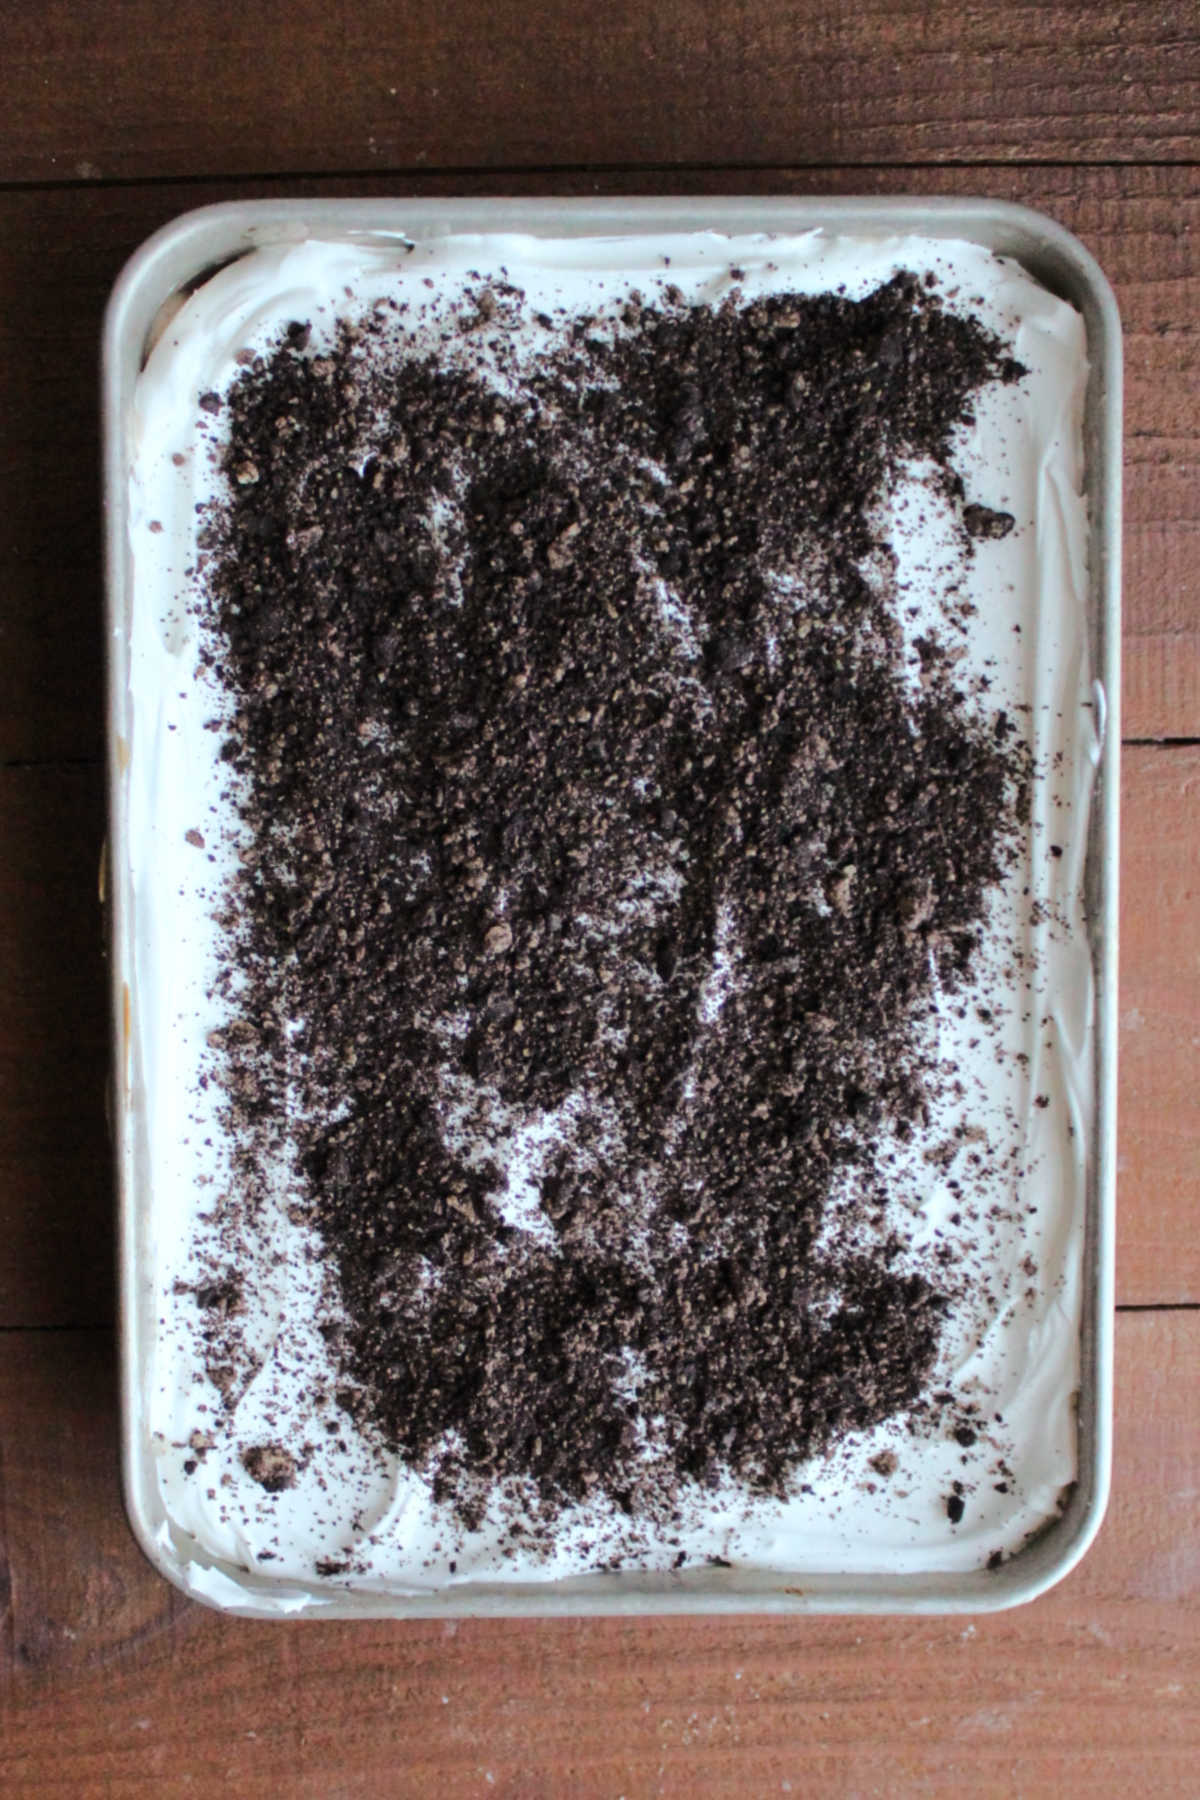 Ice cream cake topped off with whipped topping and cookie crumbs, ready to back in the freezer.